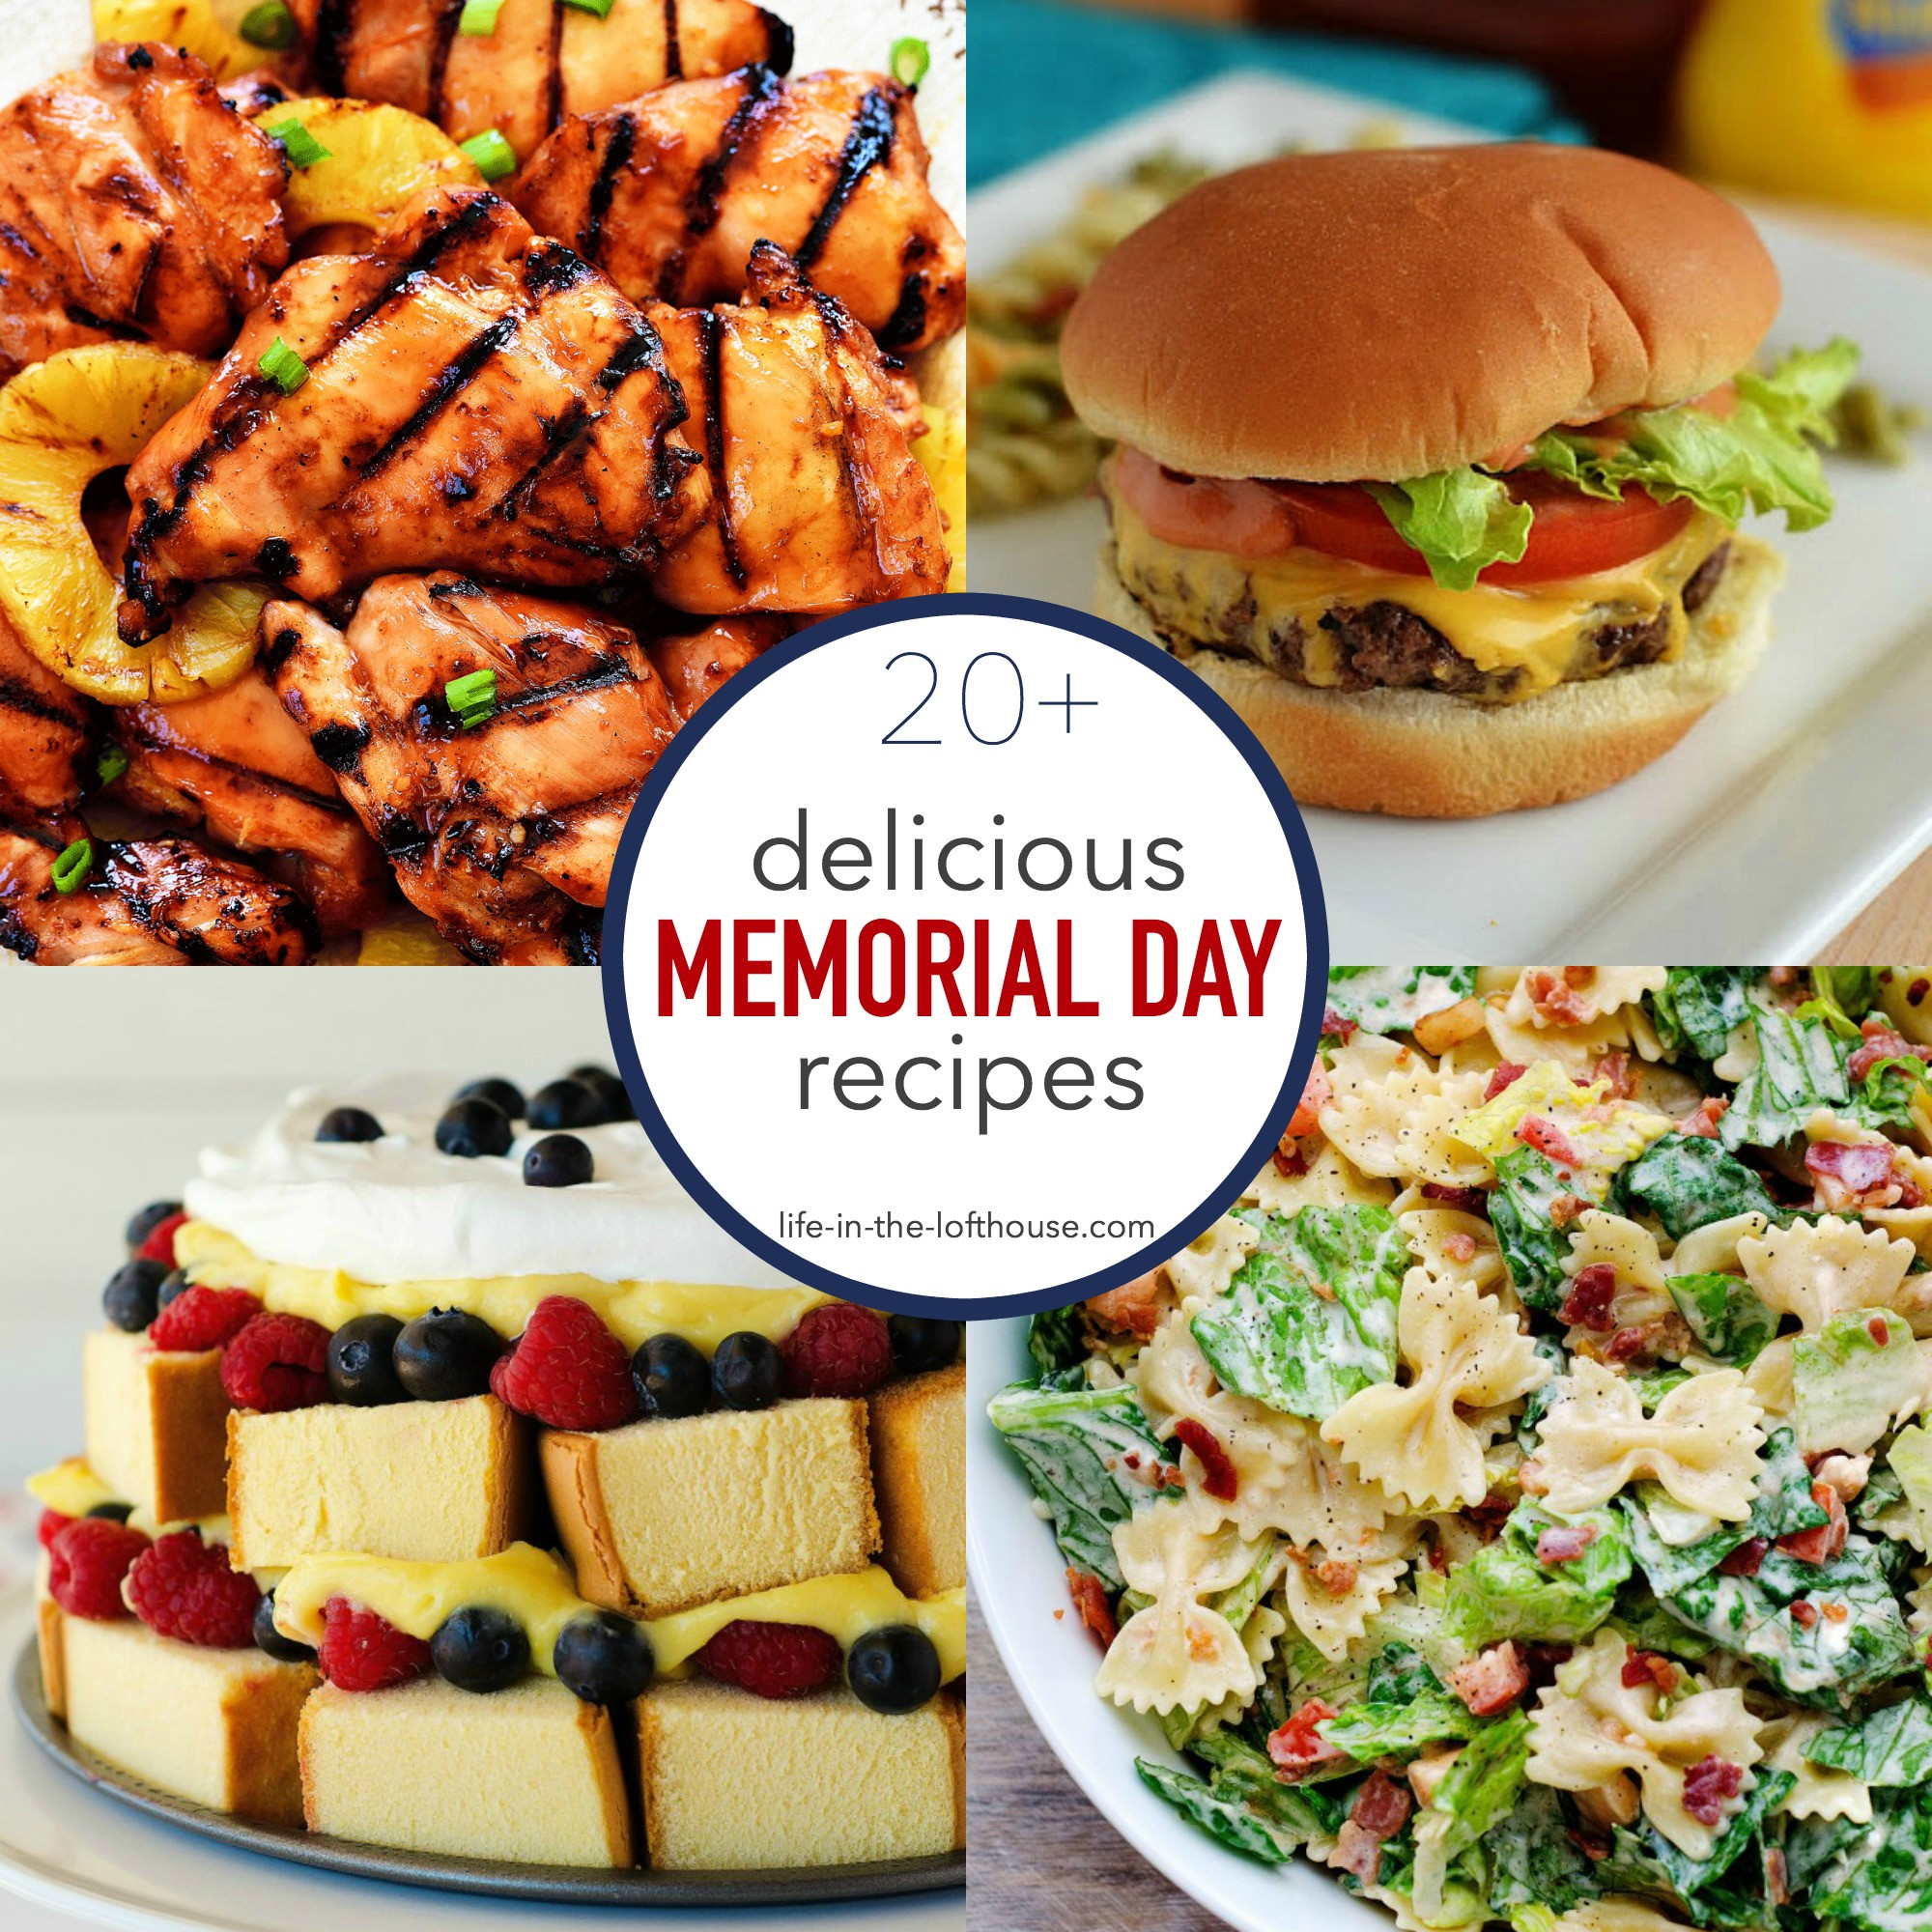 Memorial Day Food Ideas Pinterest
 20 Delicious Memorial Day Recipes Life In The Lofthouse